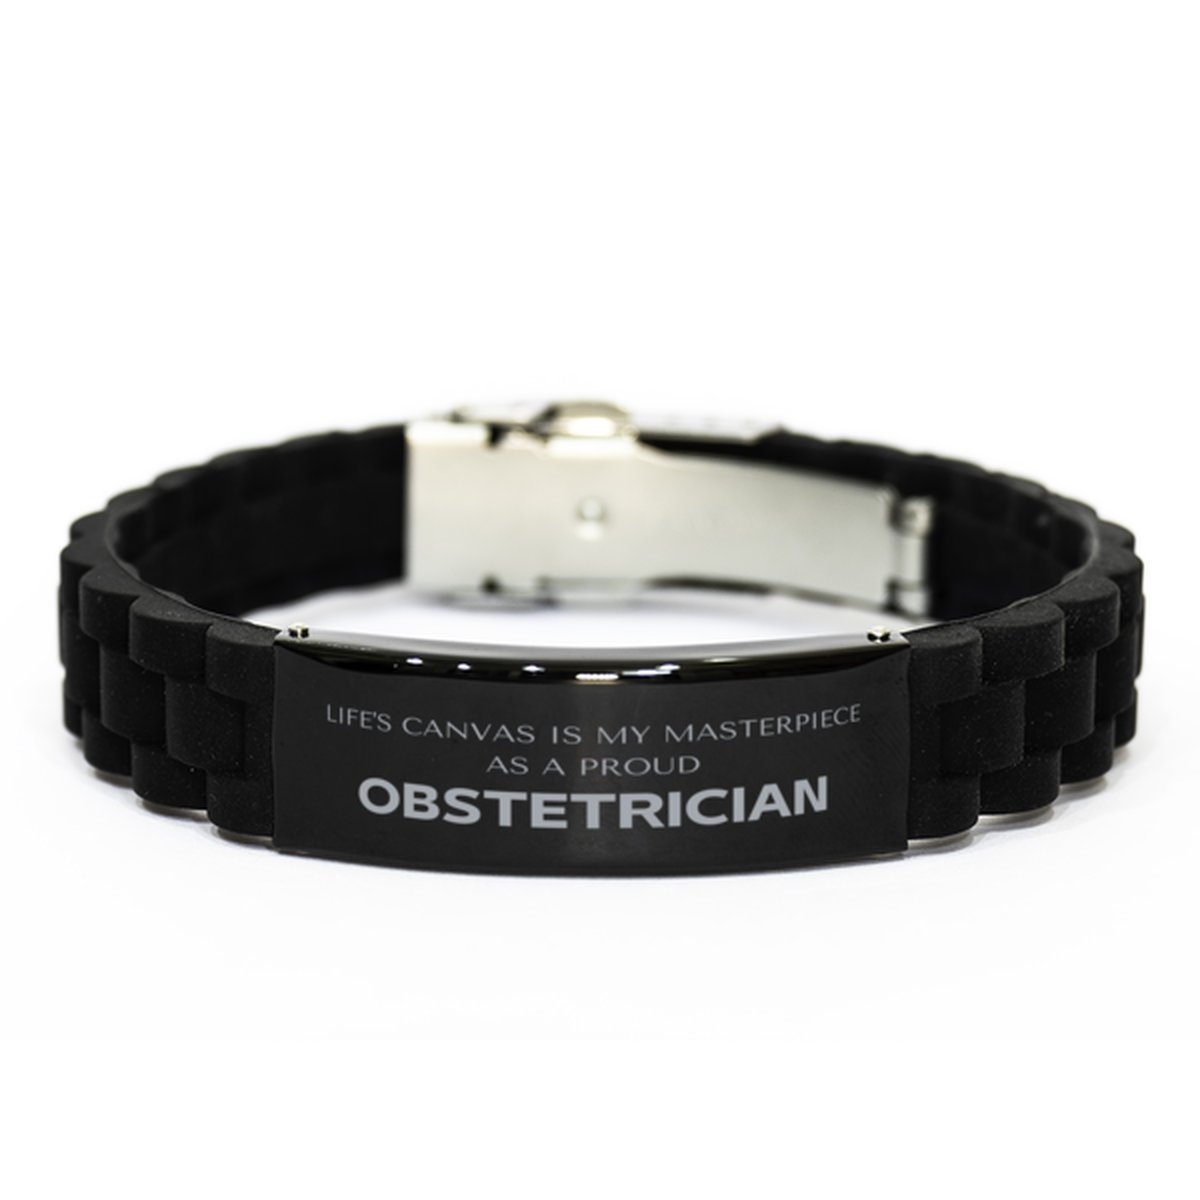 Proud Obstetrician Gifts, Life's canvas is my masterpiece, Epic Birthday Christmas Unique Black Glidelock Clasp Bracelet For Obstetrician, Coworkers, Men, Women, Friends